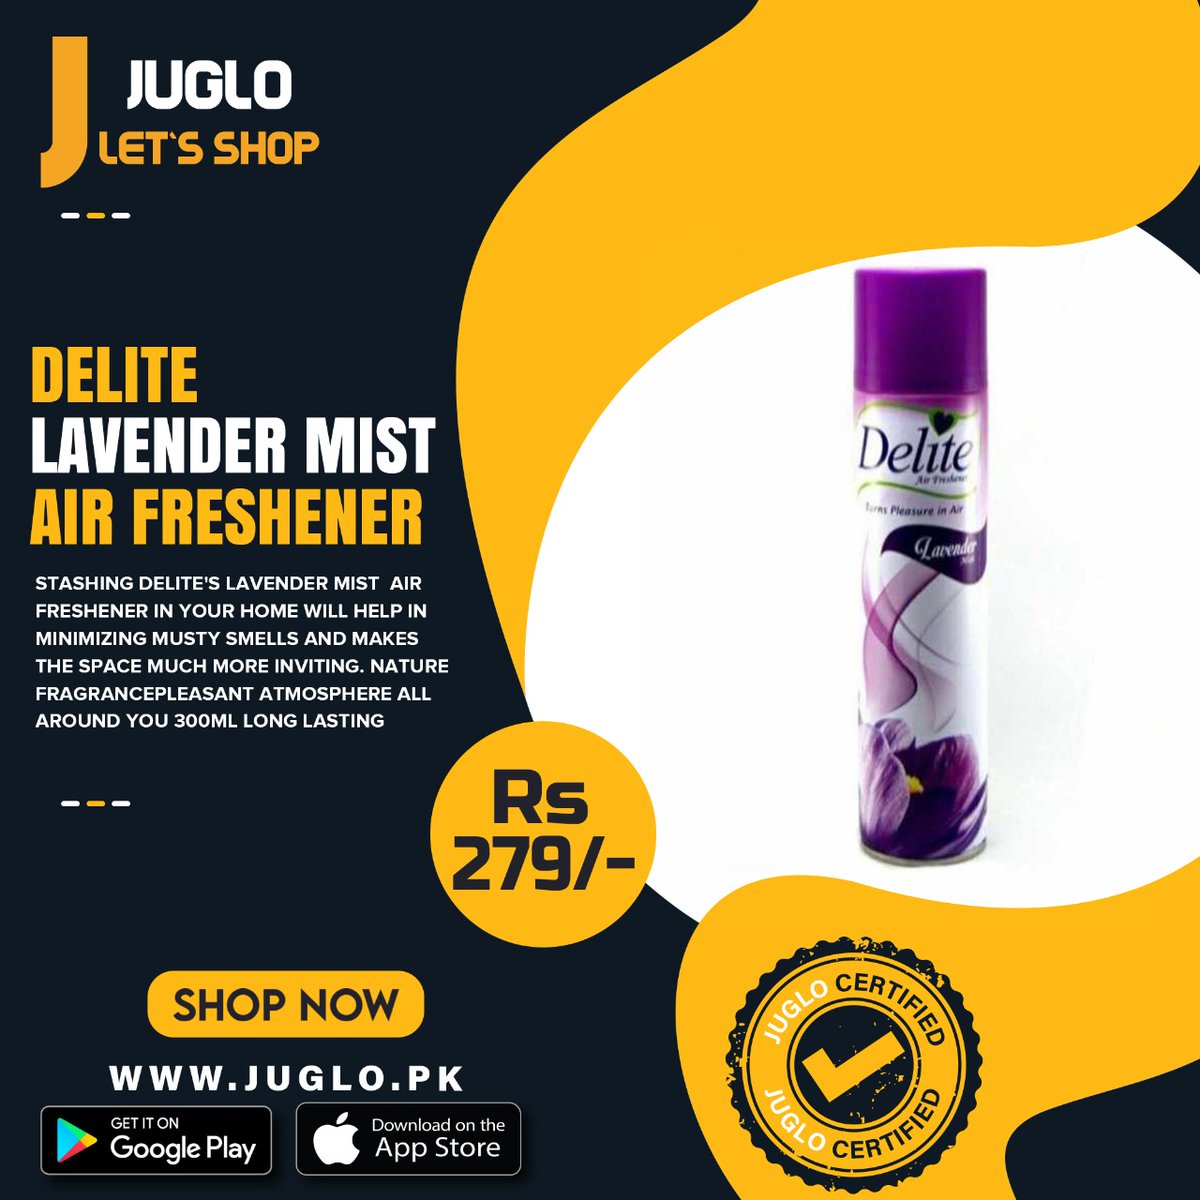 Get The Best Air Freshener For Your Home Today And Feel The Difference In The Air Around You...
Freshness Is In The Air!!!
juglo.pk/delite-lavende…
#juglopk #shoppingonline #onlineshopping #airfreshener #fragrance #lavender